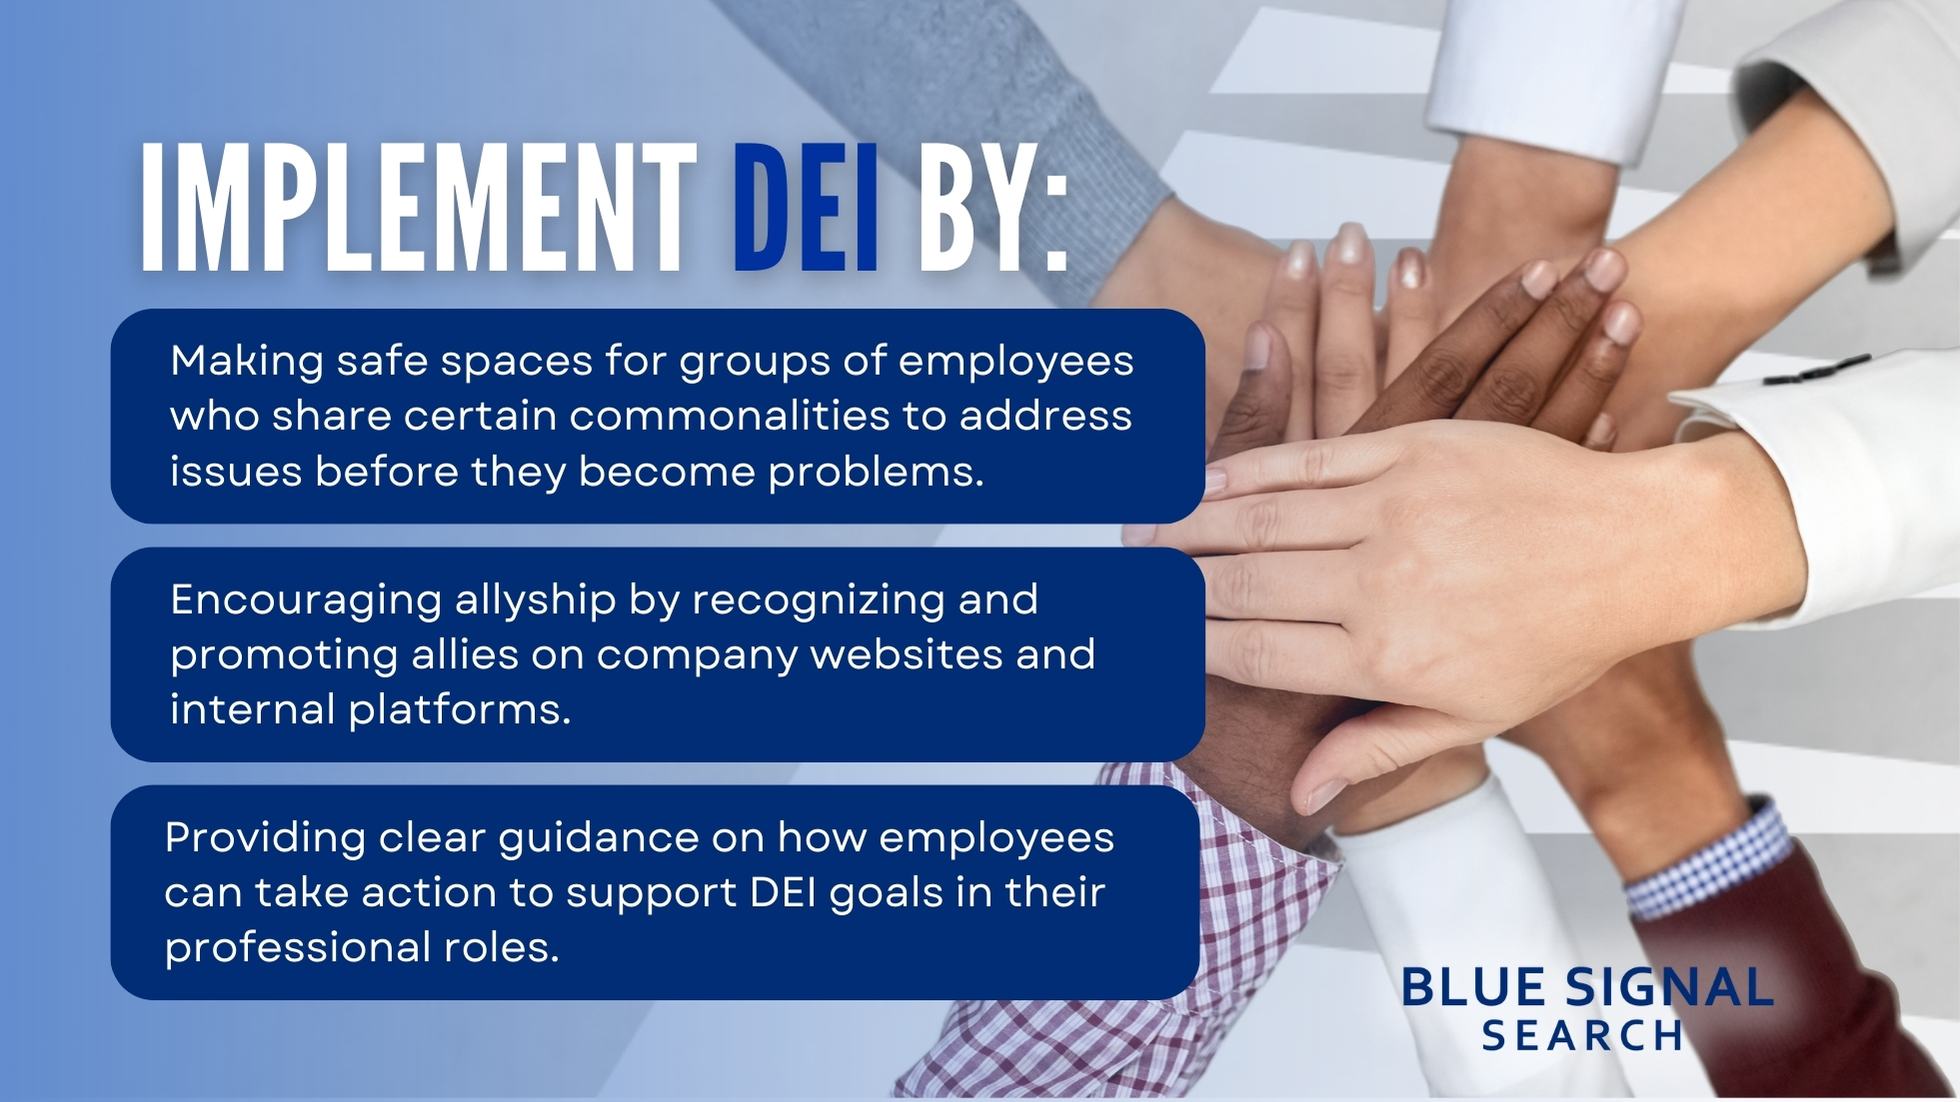 A visual guide detailing steps to implement DEI, a crucial recruiting trend, including creating safe spaces and promoting allyship.